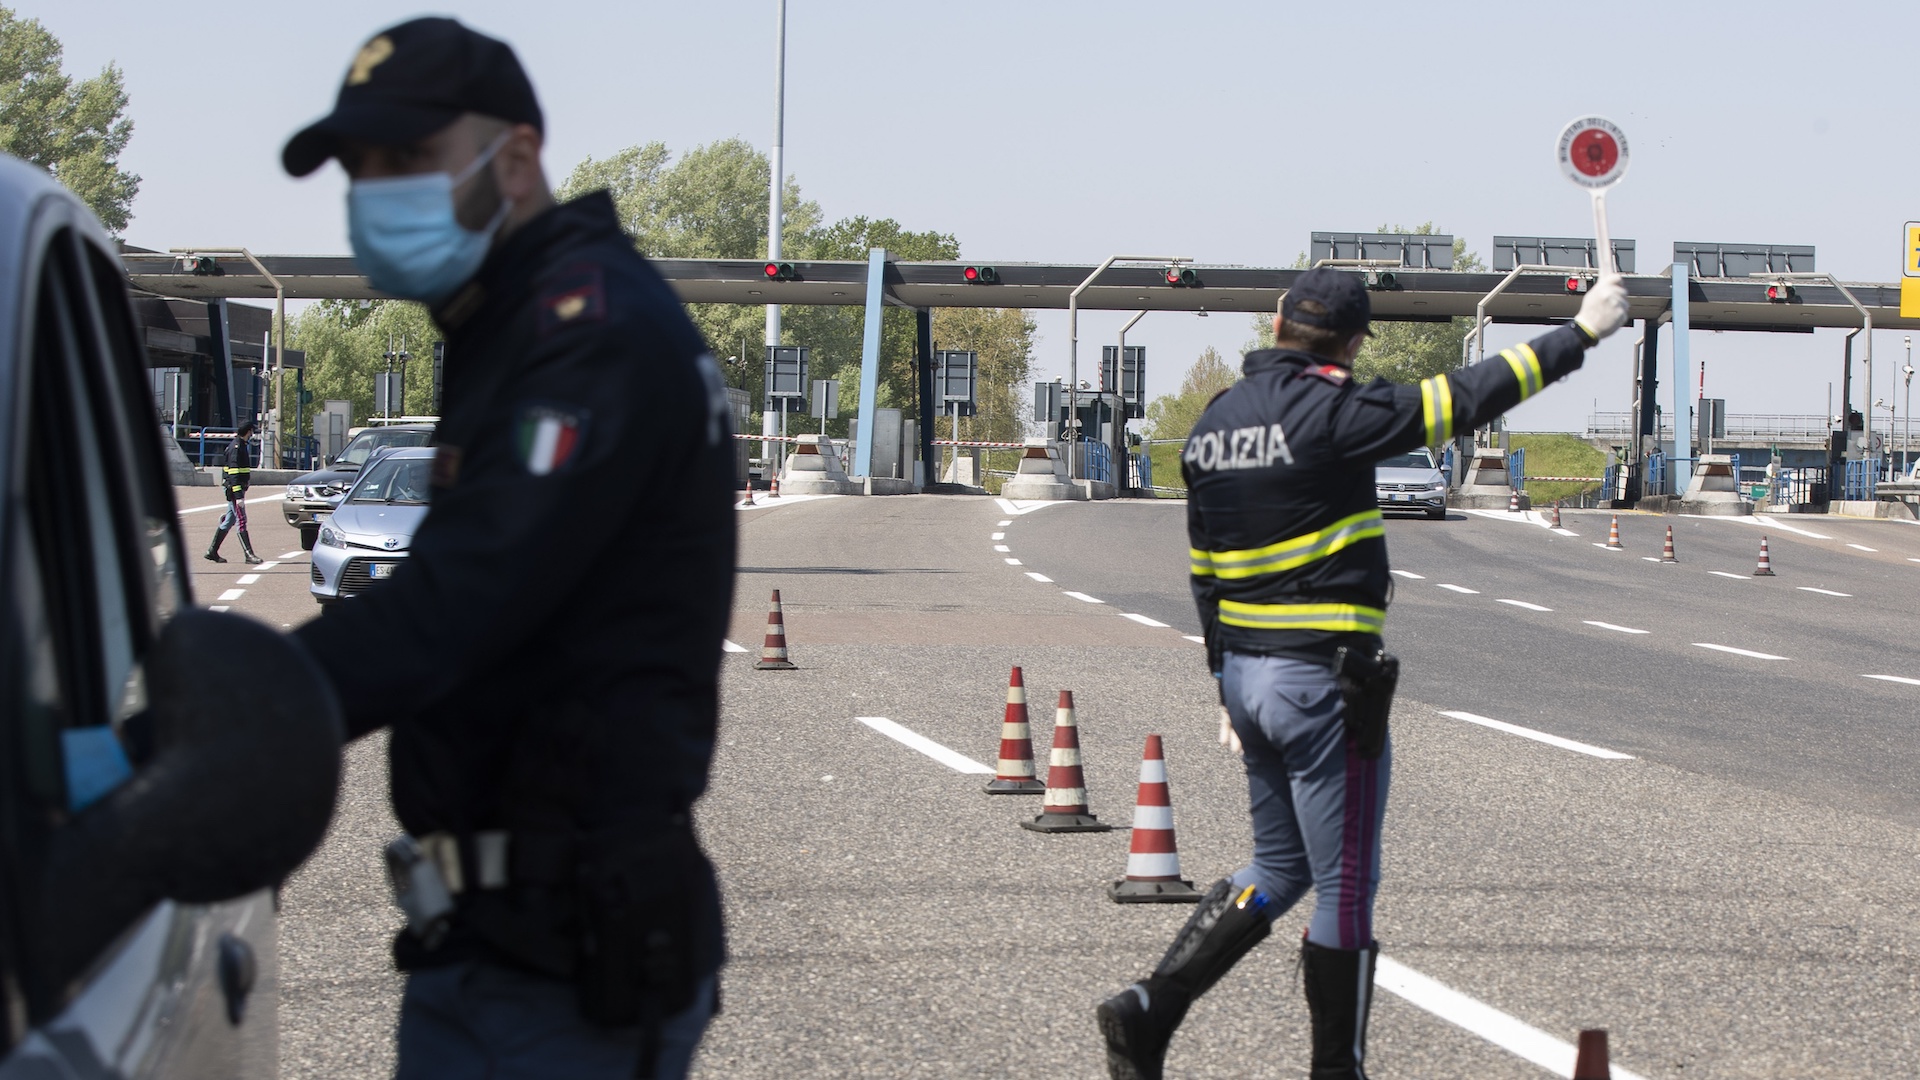 Police officers stop cars at the Melegnano highway barrier entrance, near Milan, Italy, Saturday, April 11, 2020. Using helicopters, drones and stepped-up police checks to make sure Italians don't slip out of their homes for the Easter holiday weekend, Italian authorities are doubling down on their crackdown against violators of the nationwide lockdown decree. (AP Photo/Luca Bruno)